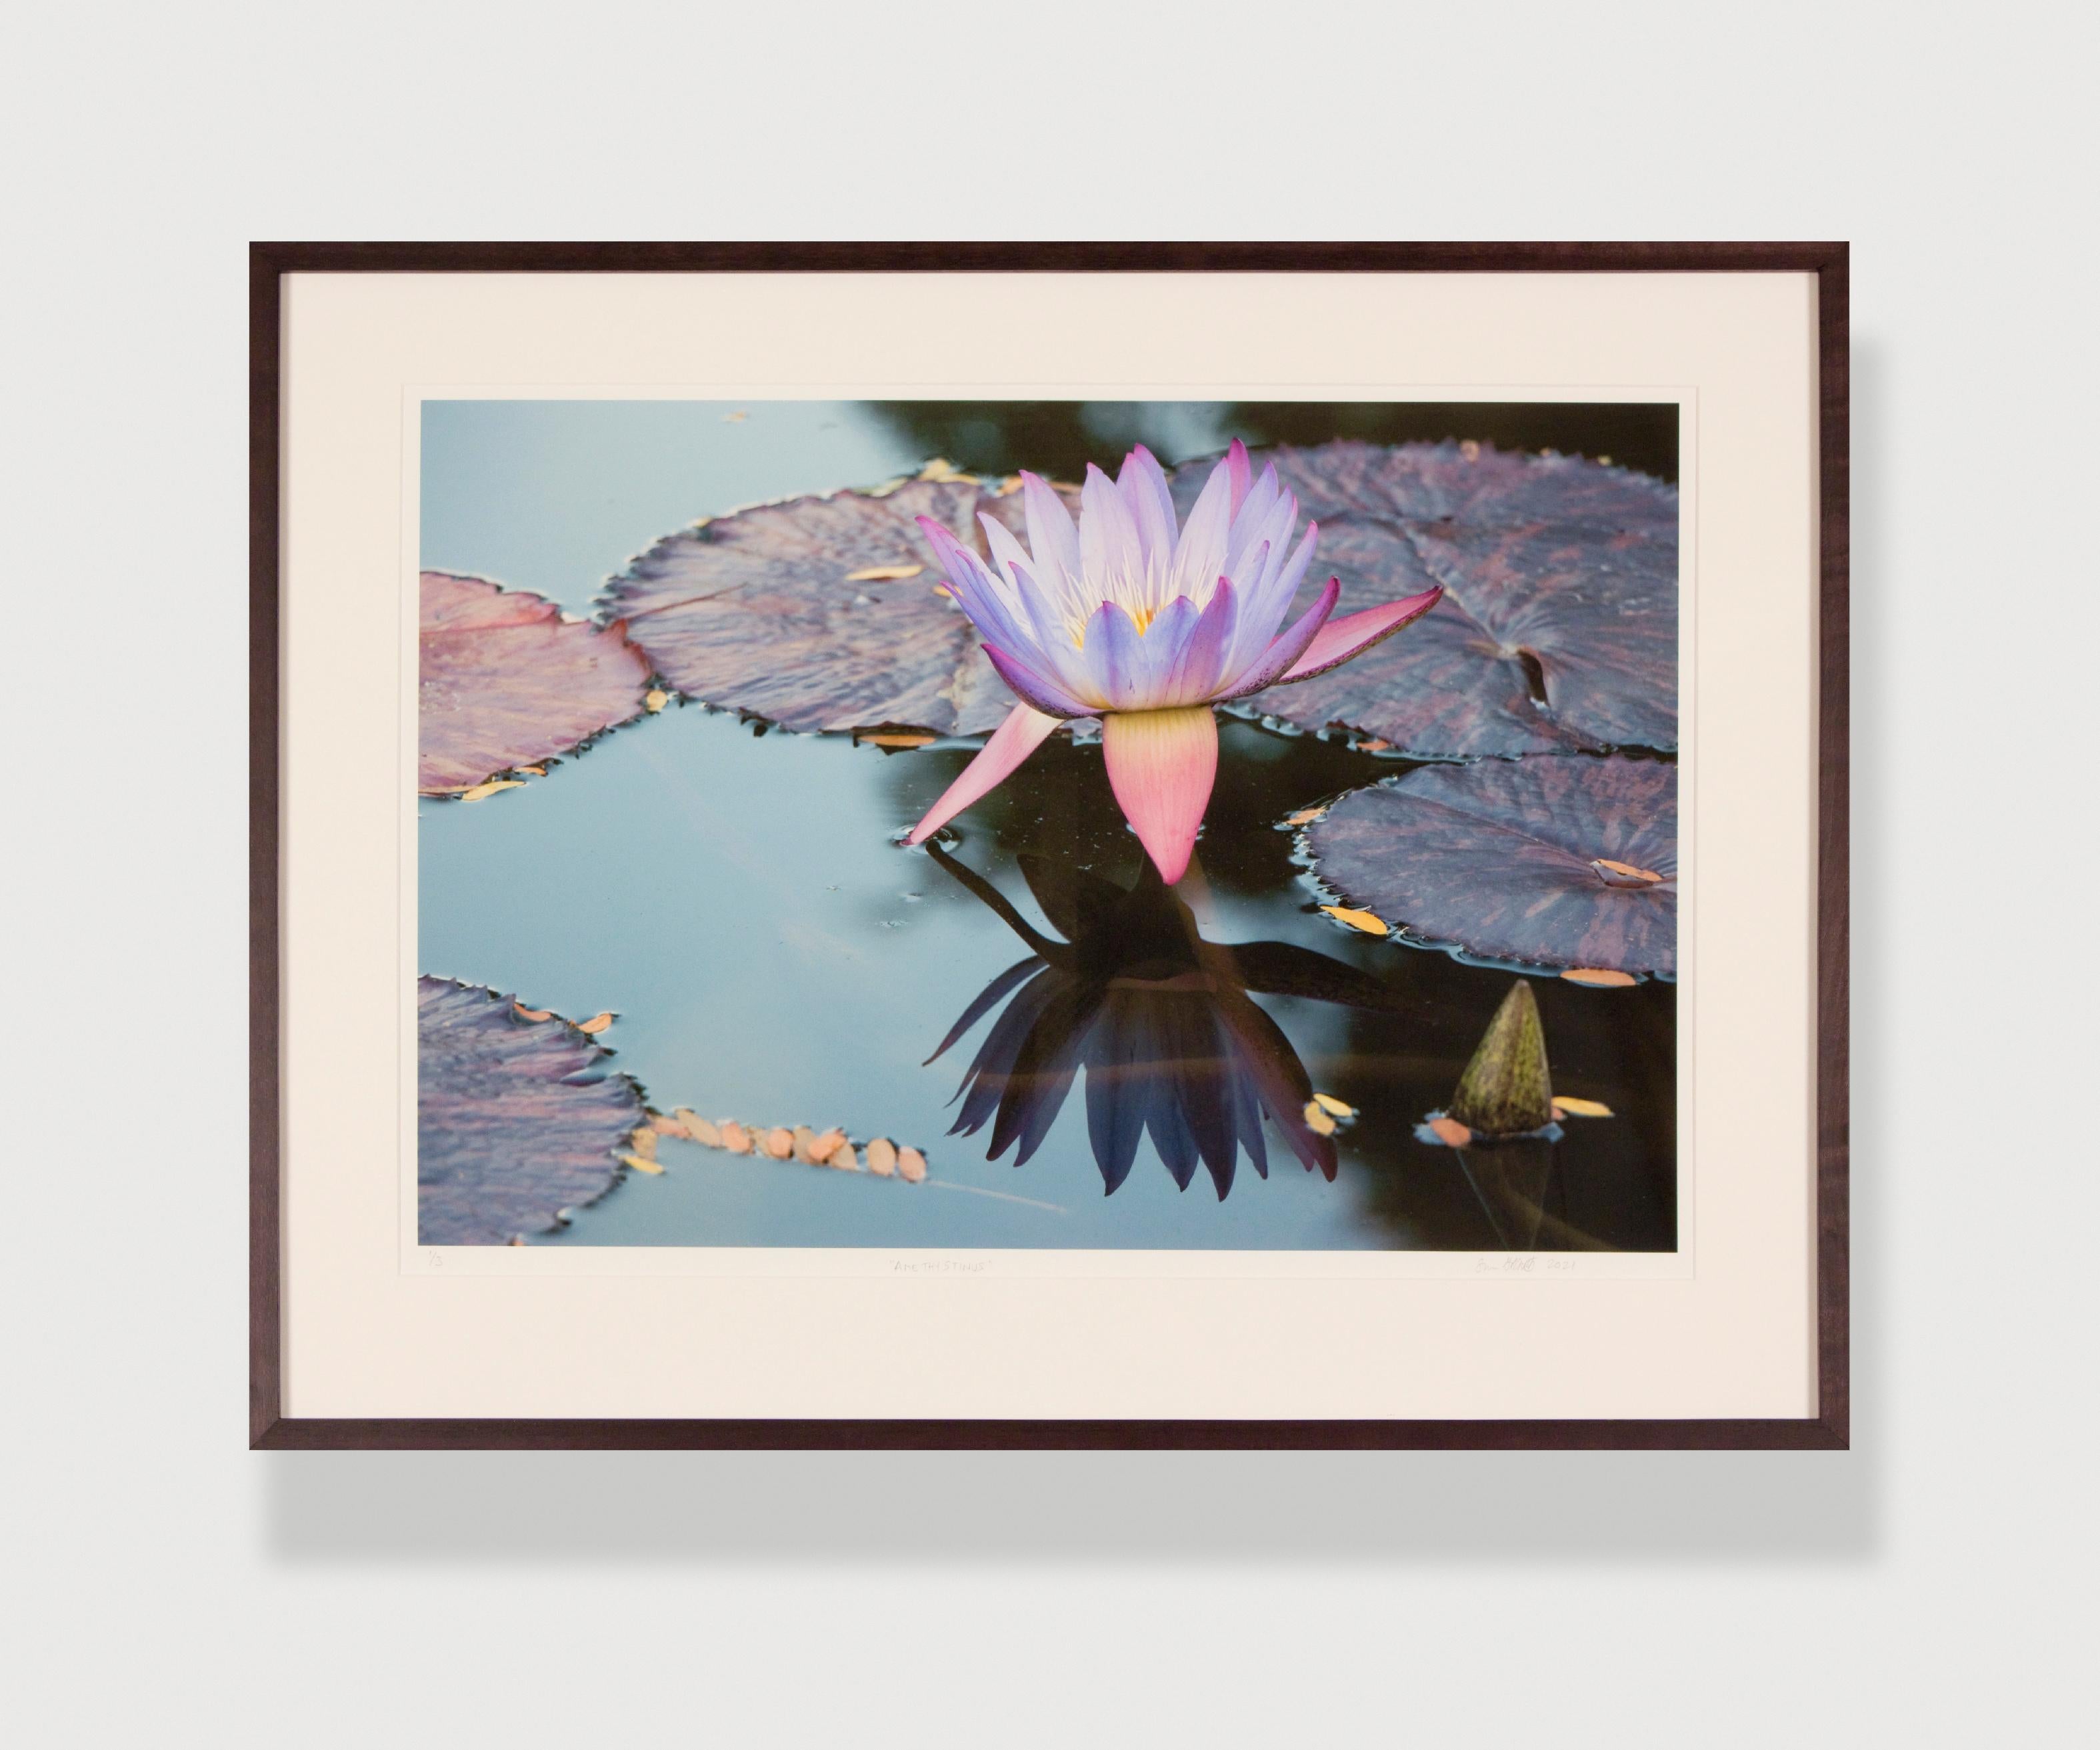 AMETHYSTINUS - Floral Art Photography / Water Lily Reflections / Botanic Garden - Print by Susan Goldsmith